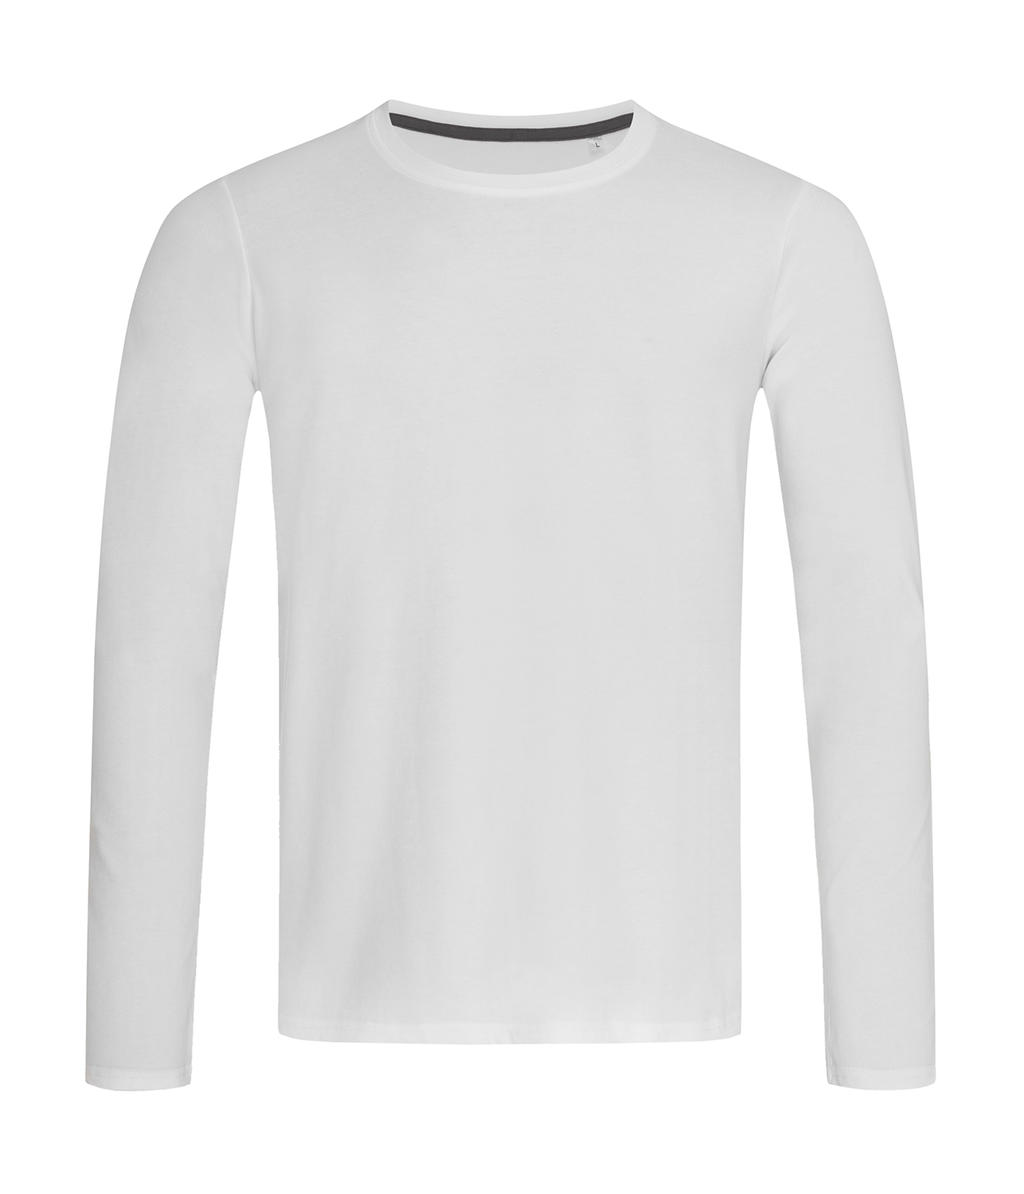  Clive Long Sleeve in Farbe White